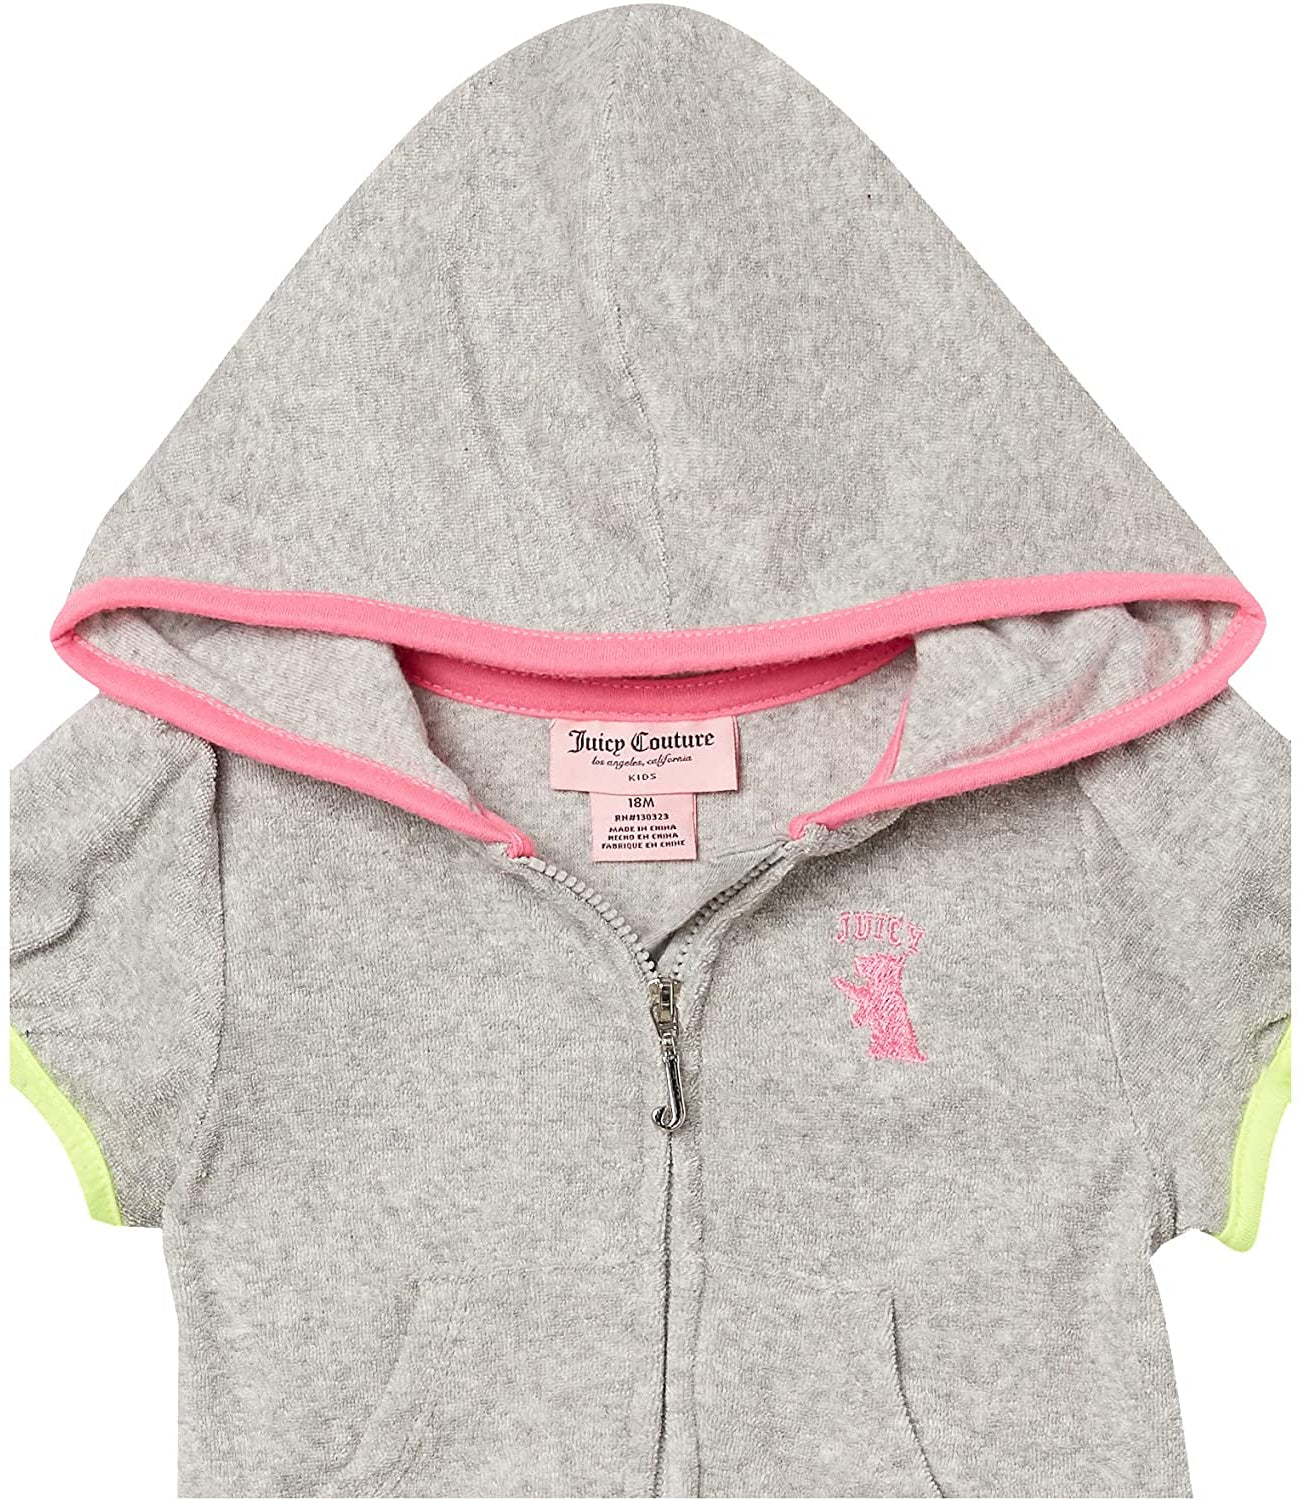 Juicy Couture Girls 12-24 Months 2 Pieces Loop Terry Hooded Set